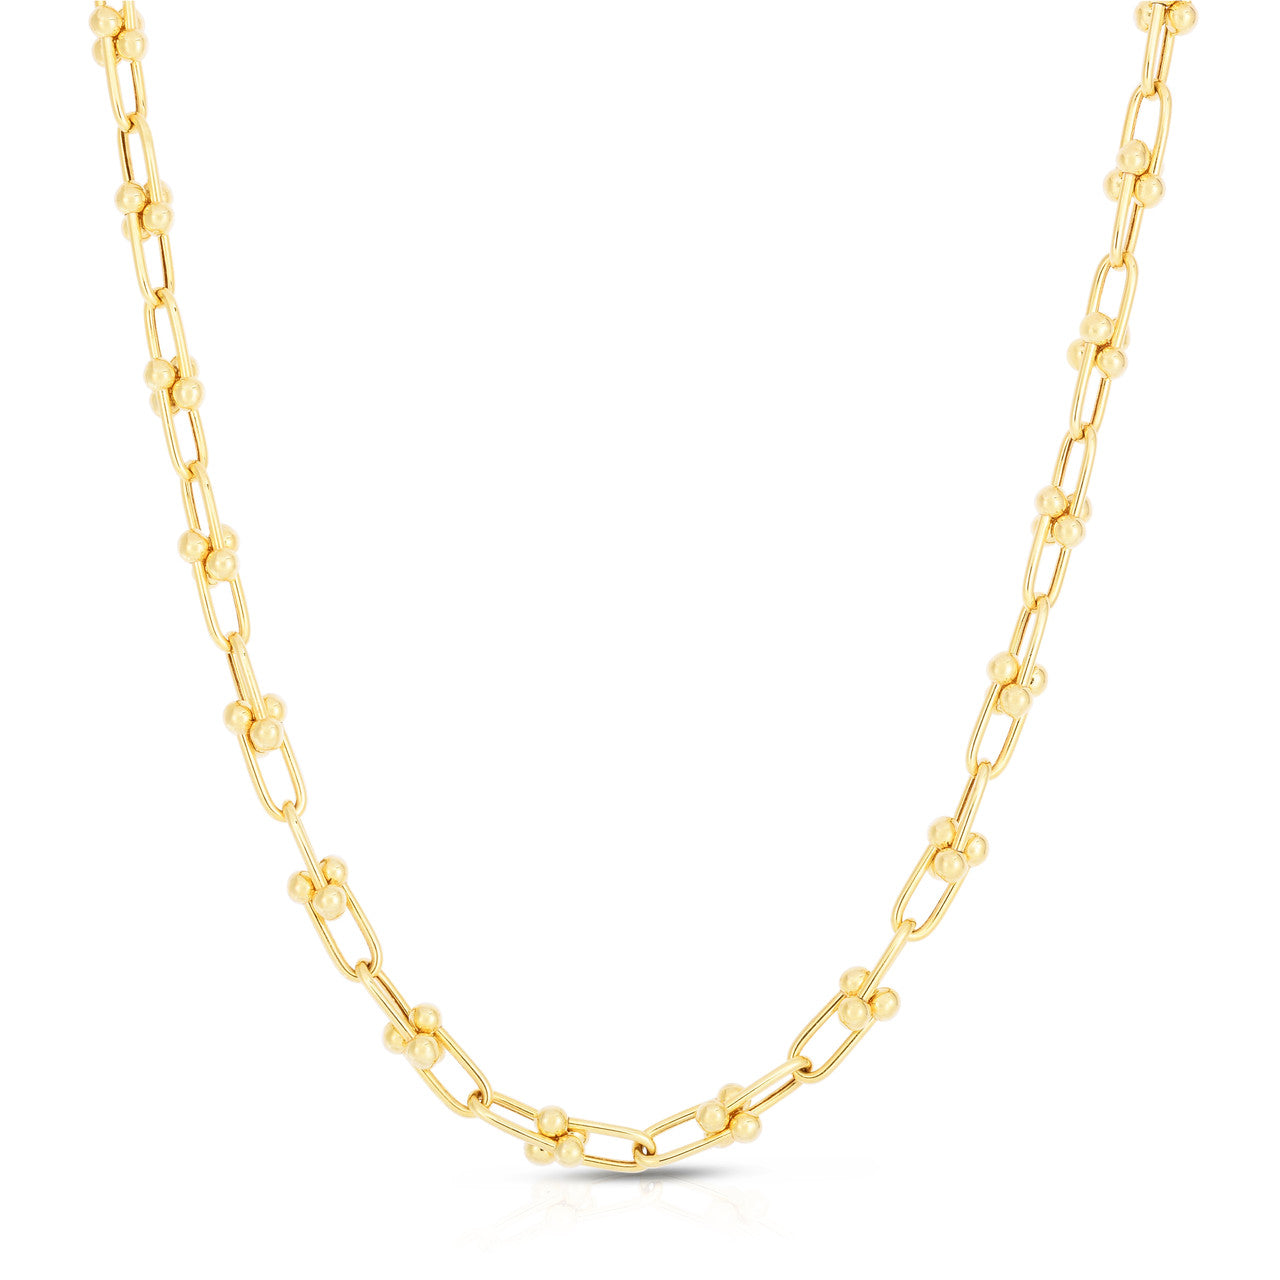 Jax Chain Necklace in Yellow Gold